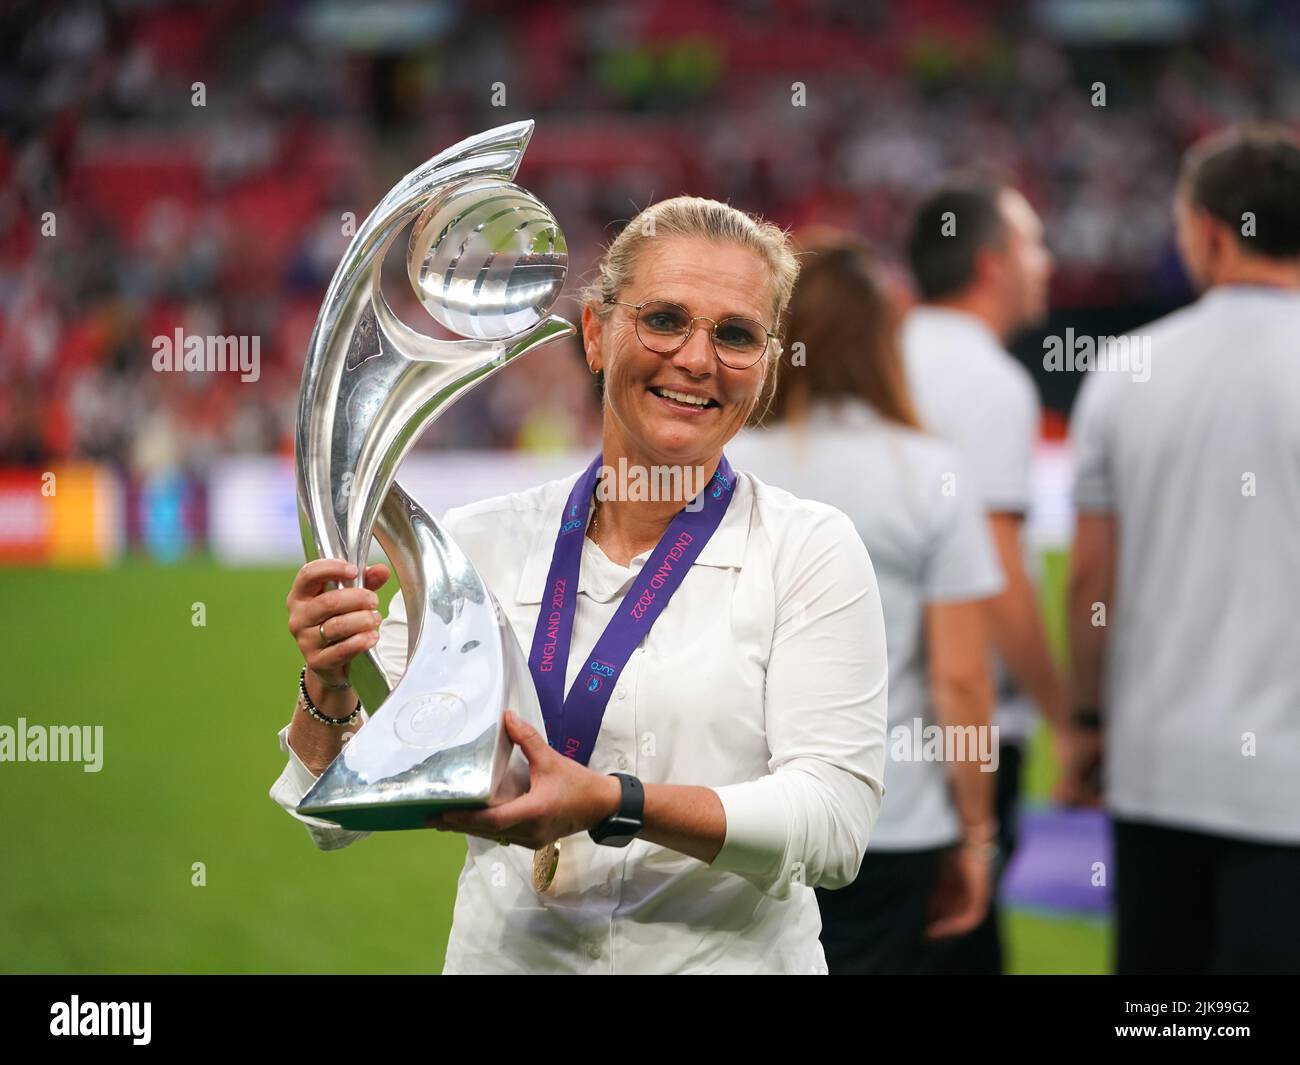 London, UK. 31st July, 2022. London, England, July 31st 2022: Headcoach of England Sarina Wiegman holds the trophy during the ceremony during the UEFA Womens Euro 2022 Final football match between England and Germany at Wembley Stadium, England. (Daniela Porcelli/SPP) Credit: SPP Sport Press Photo. /Alamy Live News Stock Photo